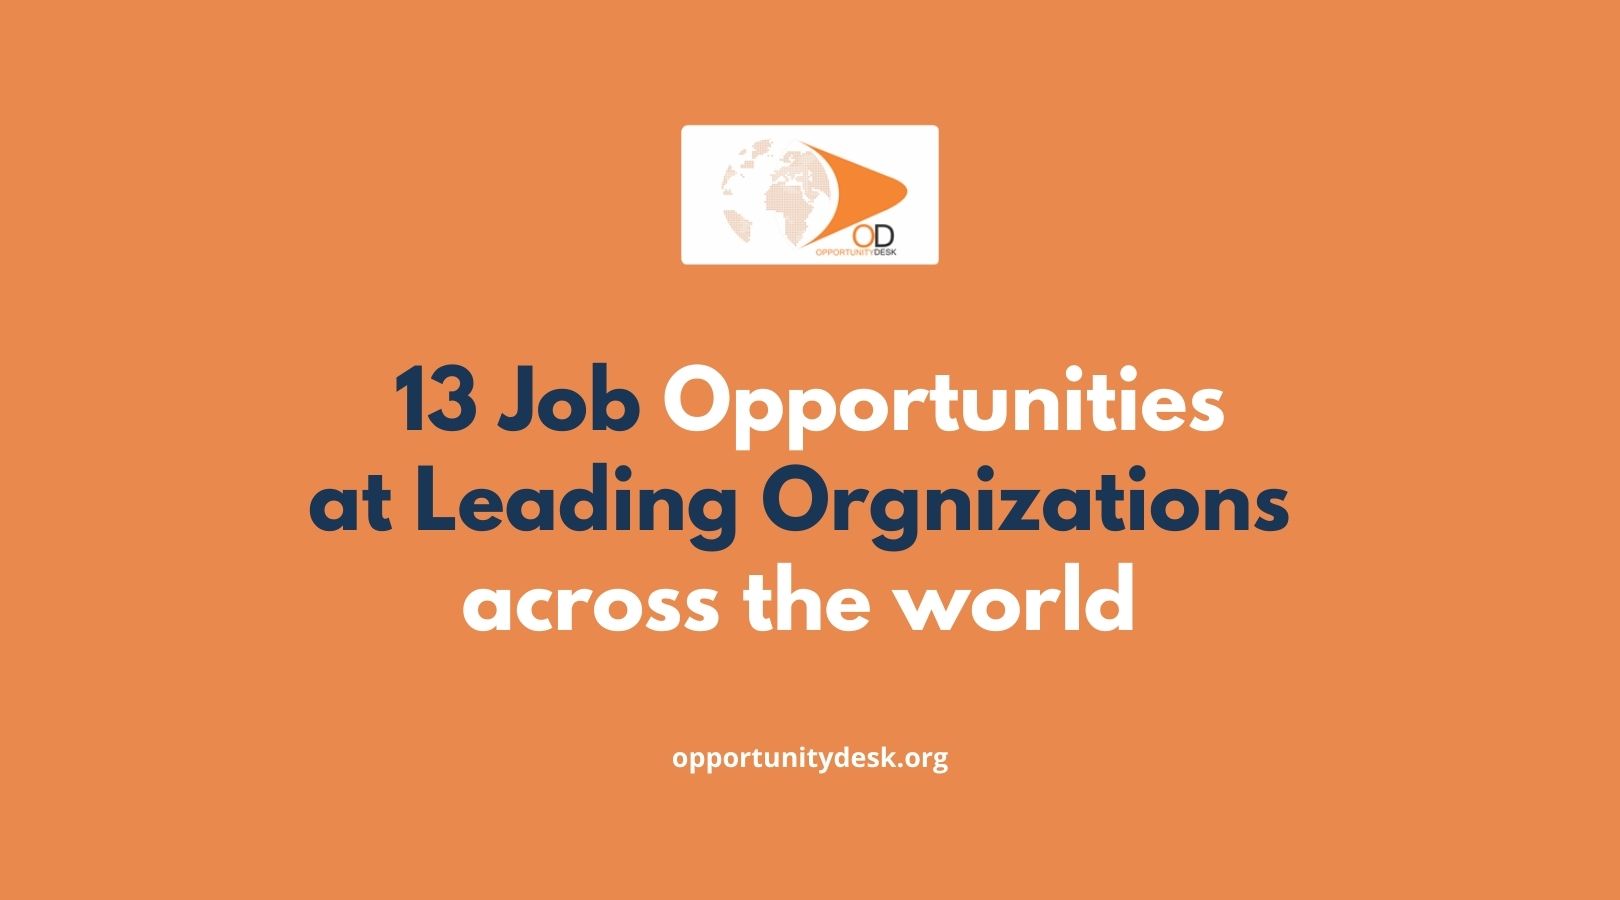 13 Job Opportunities at Leading Organizations across the world – May 19, 2022